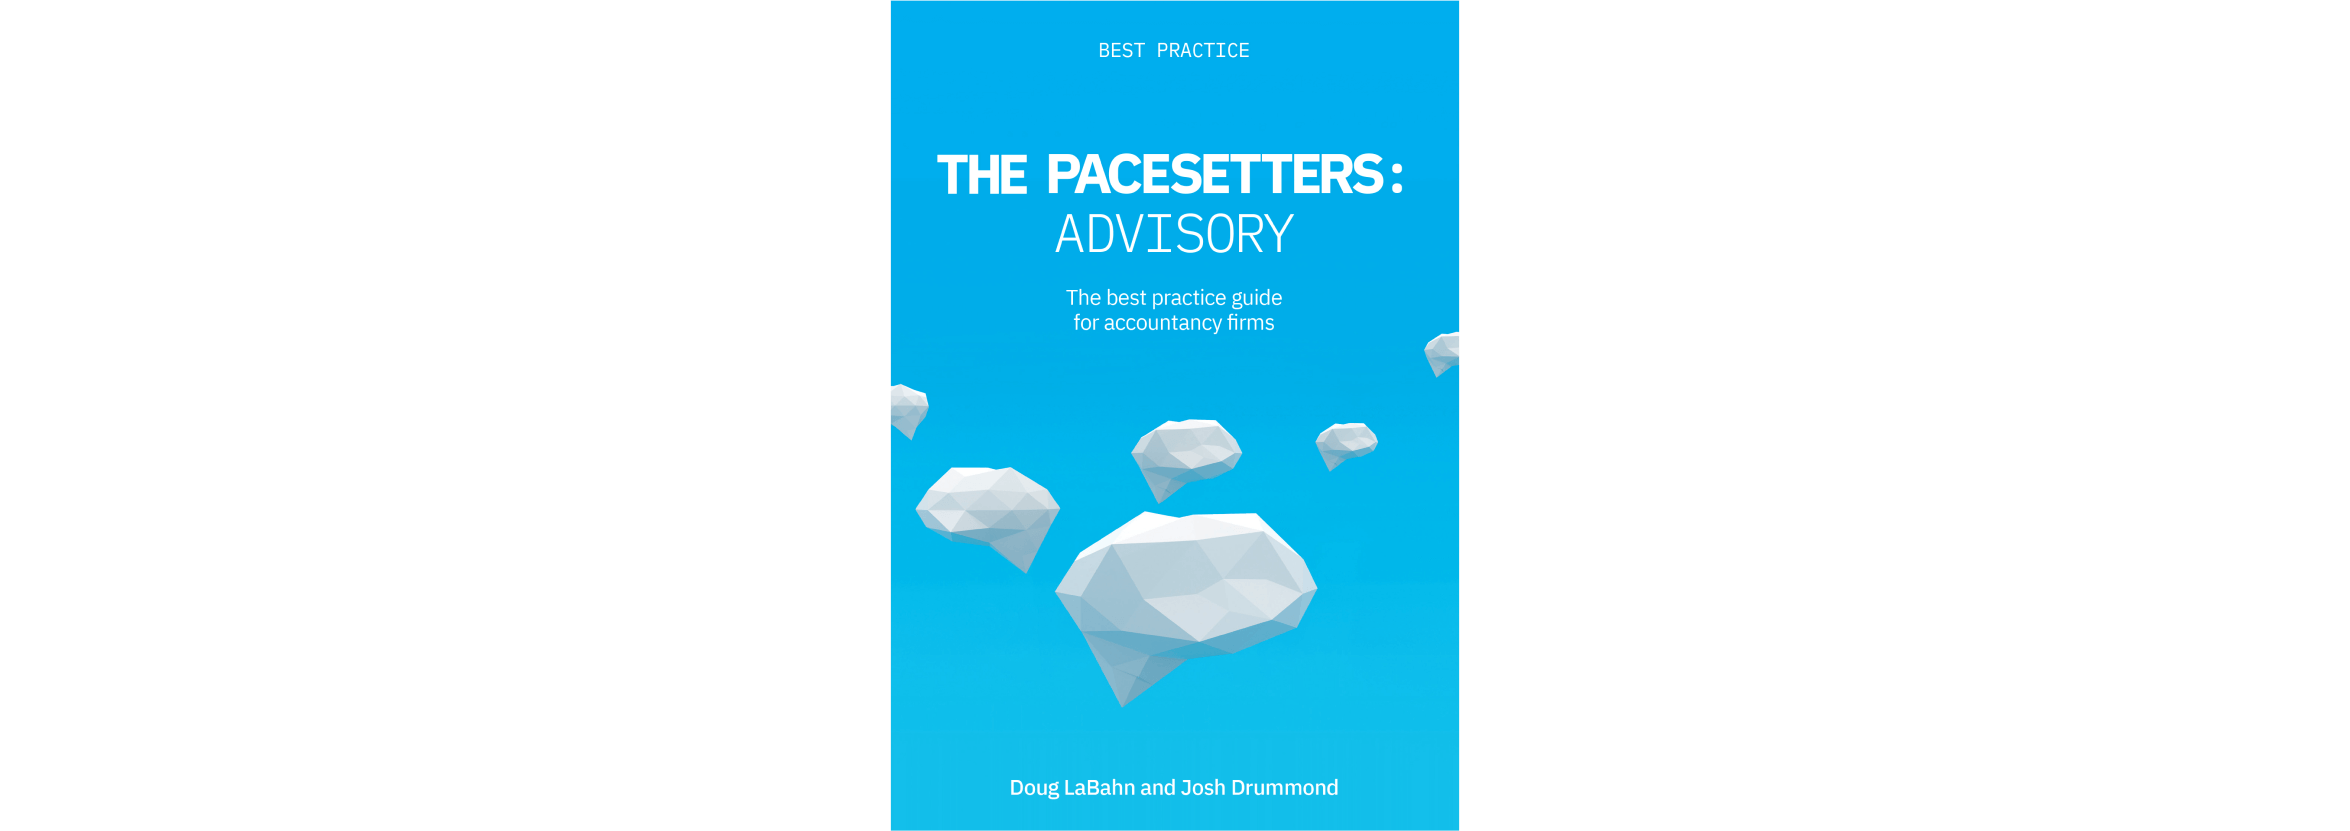 The cover of The Pacesetters: Advsory, featuring a series of stylised clouds blowing across  a blue sky.